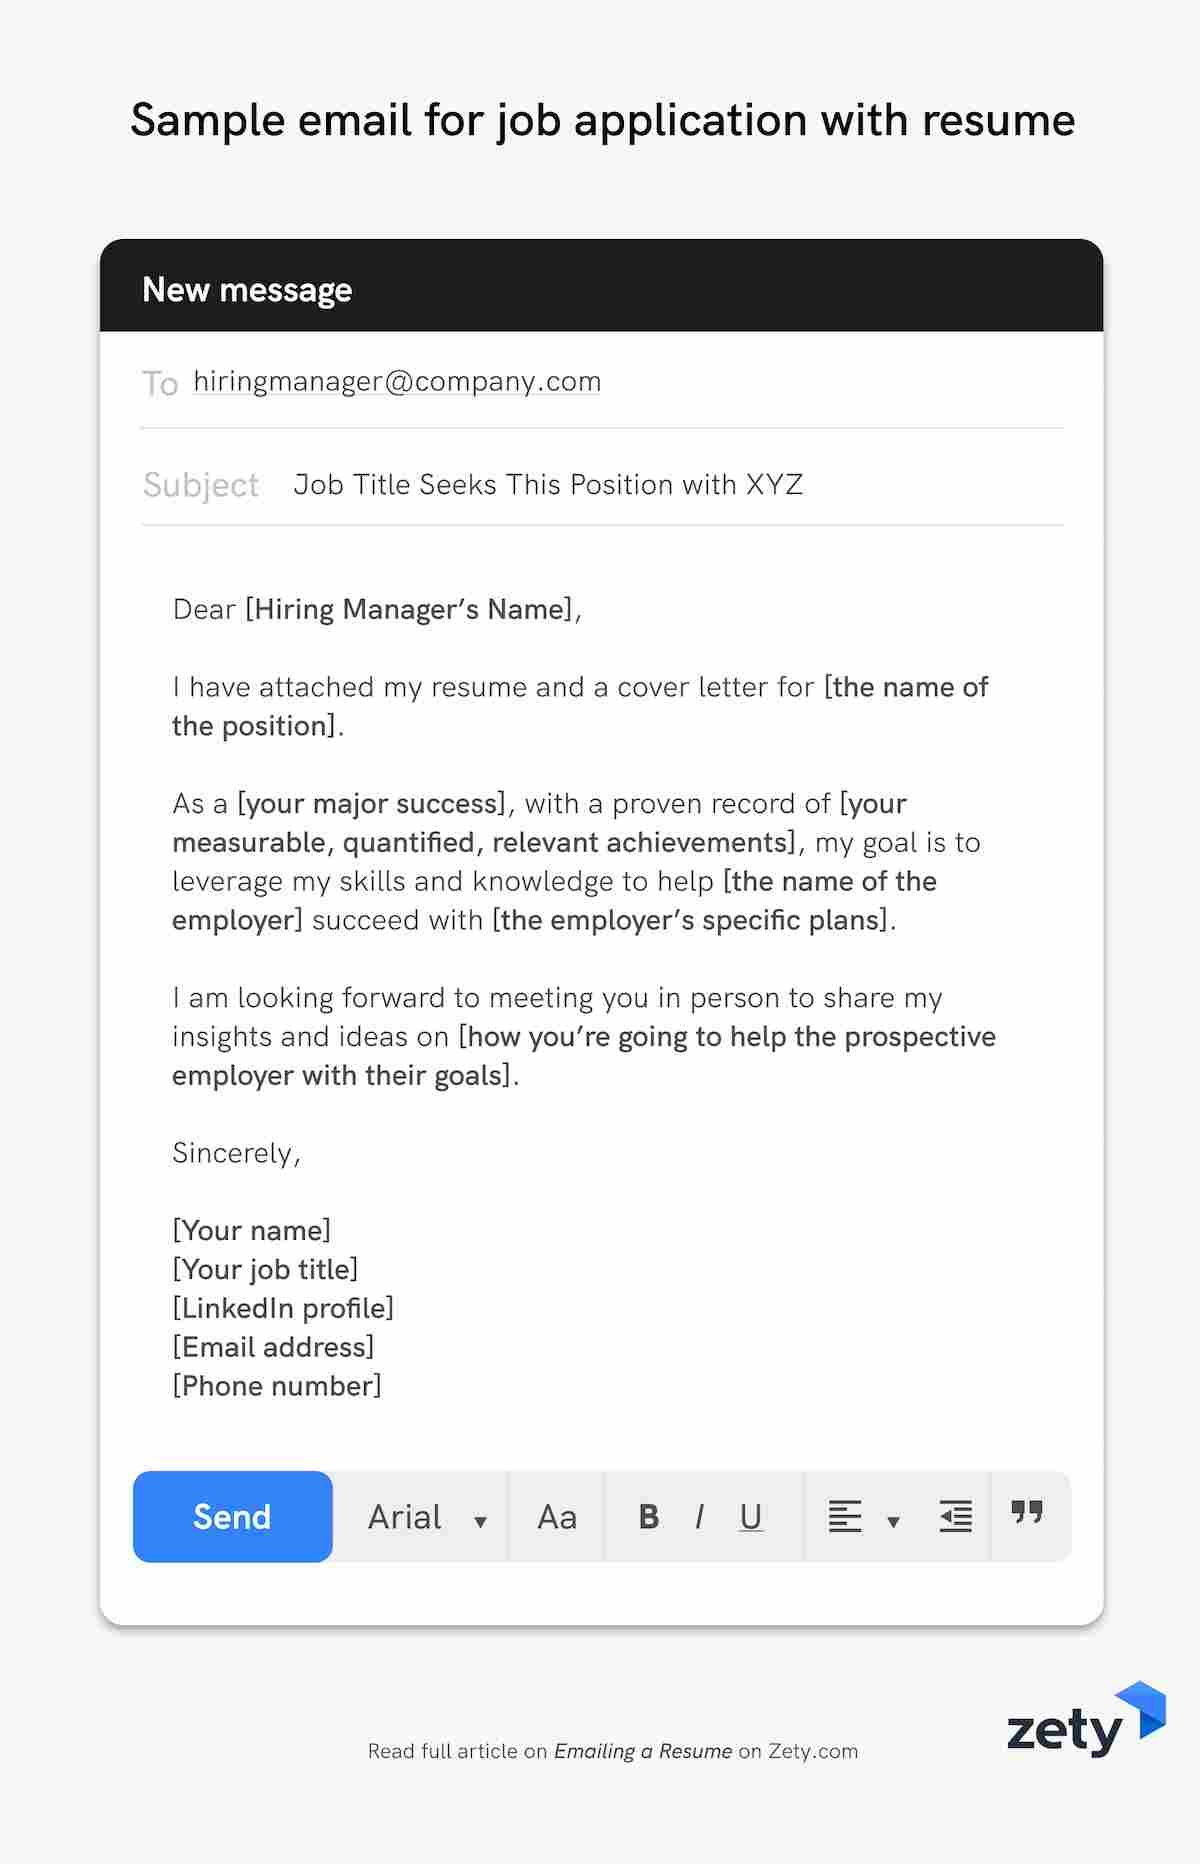 Sample Email to Send Resume and Cover Letter for Job How to Email A Resume to An Employer: 12lancarrezekiq Email Examples